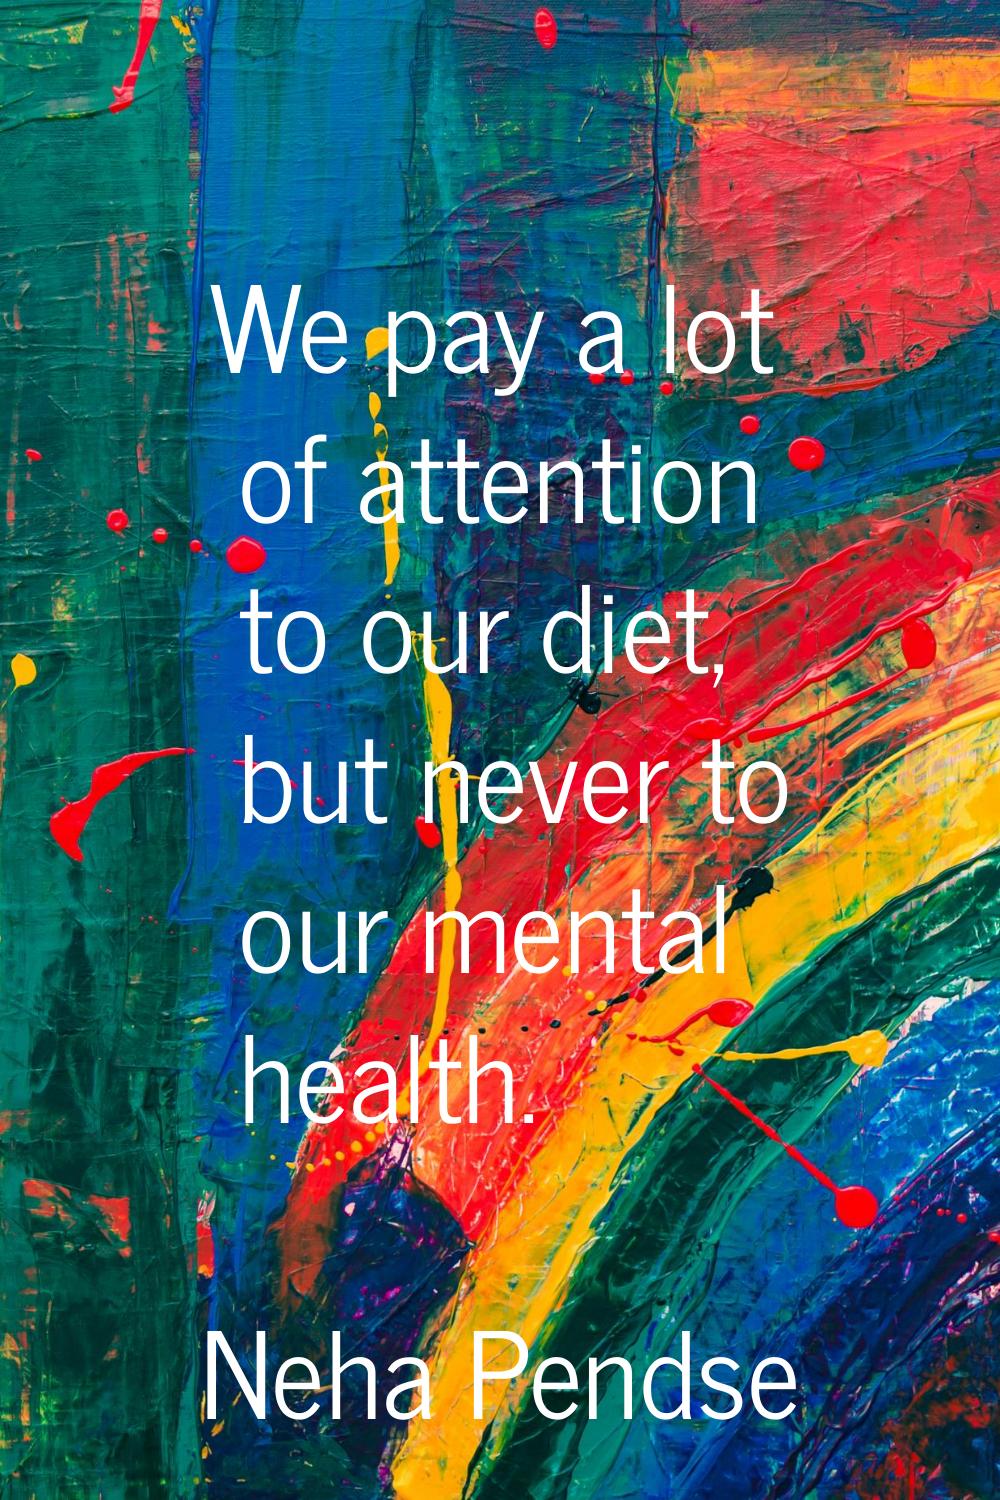 We pay a lot of attention to our diet, but never to our mental health.